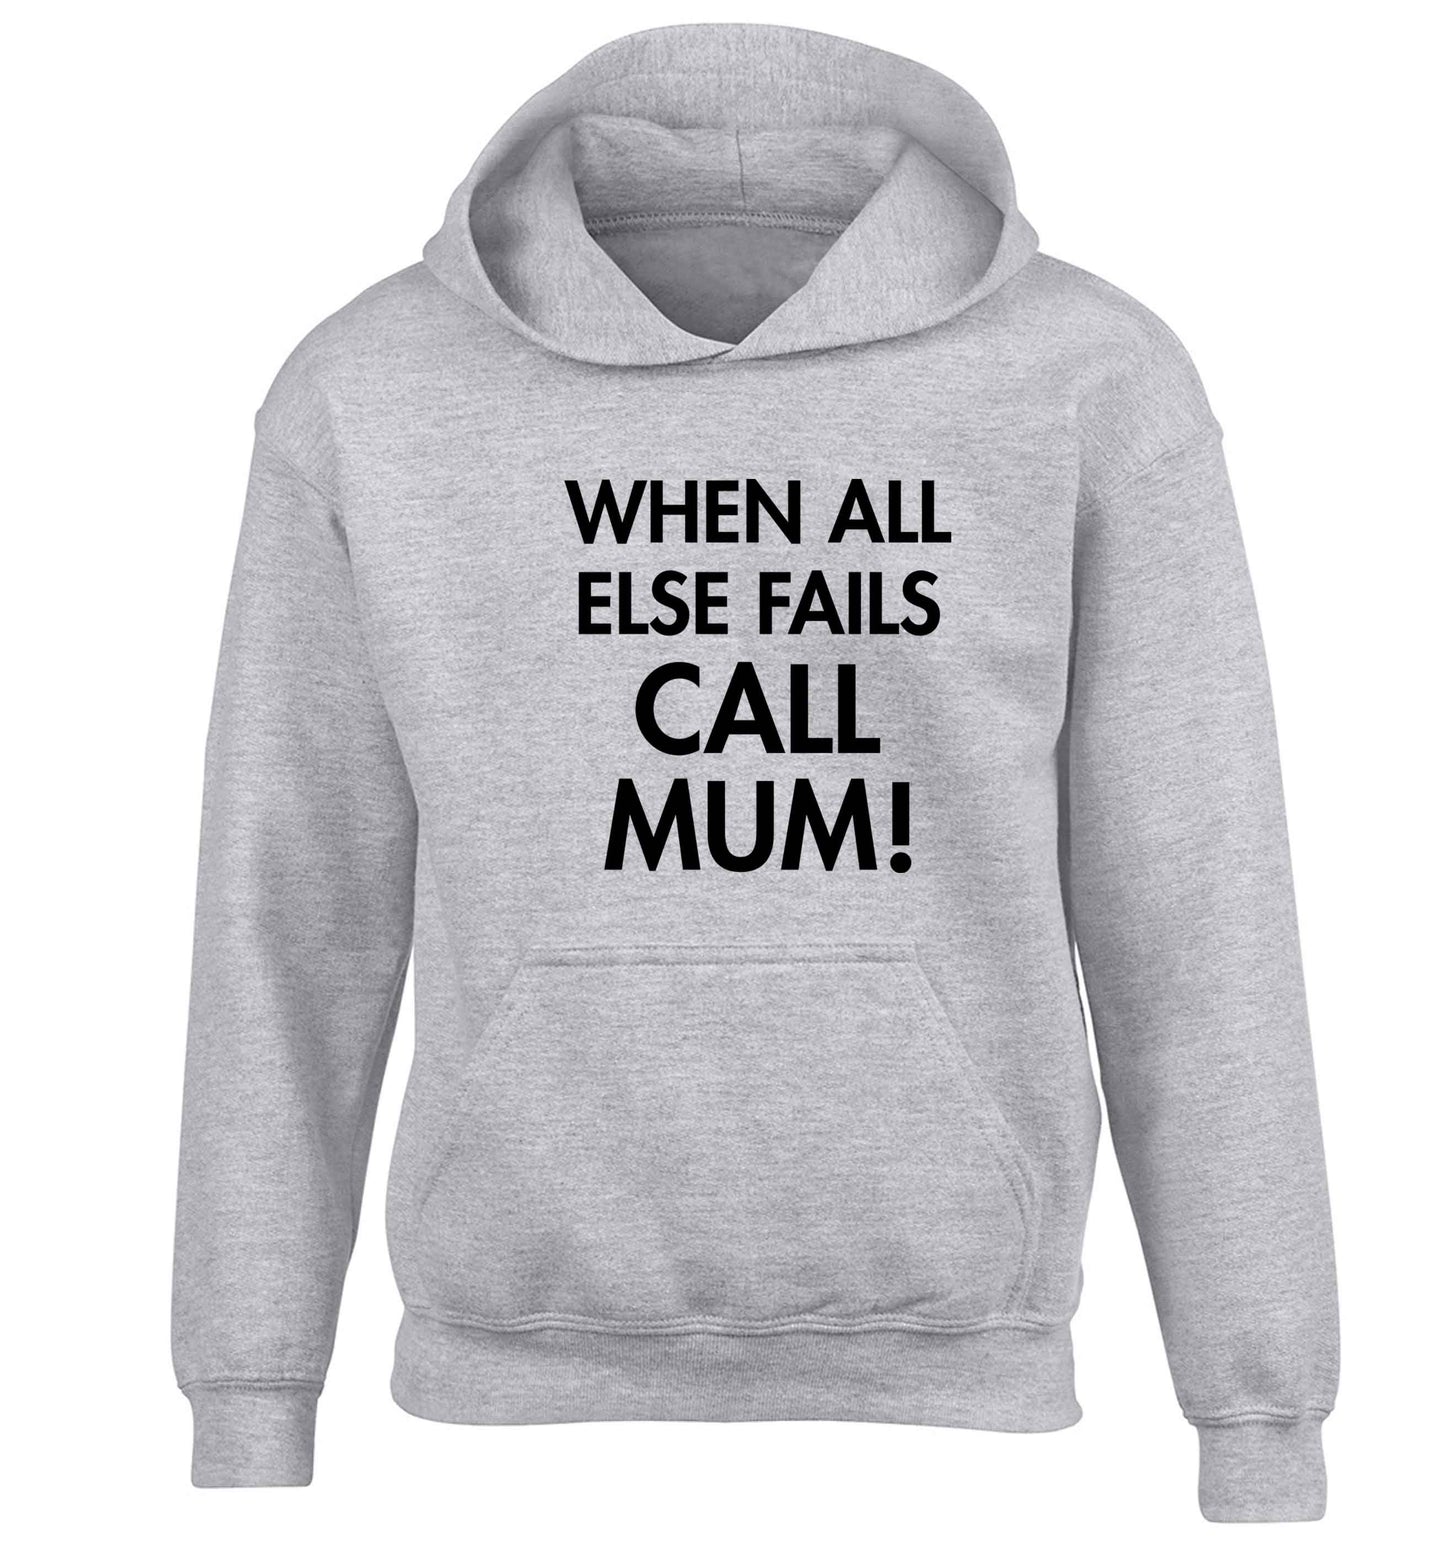 When all else fails call mum! children's grey hoodie 12-13 Years